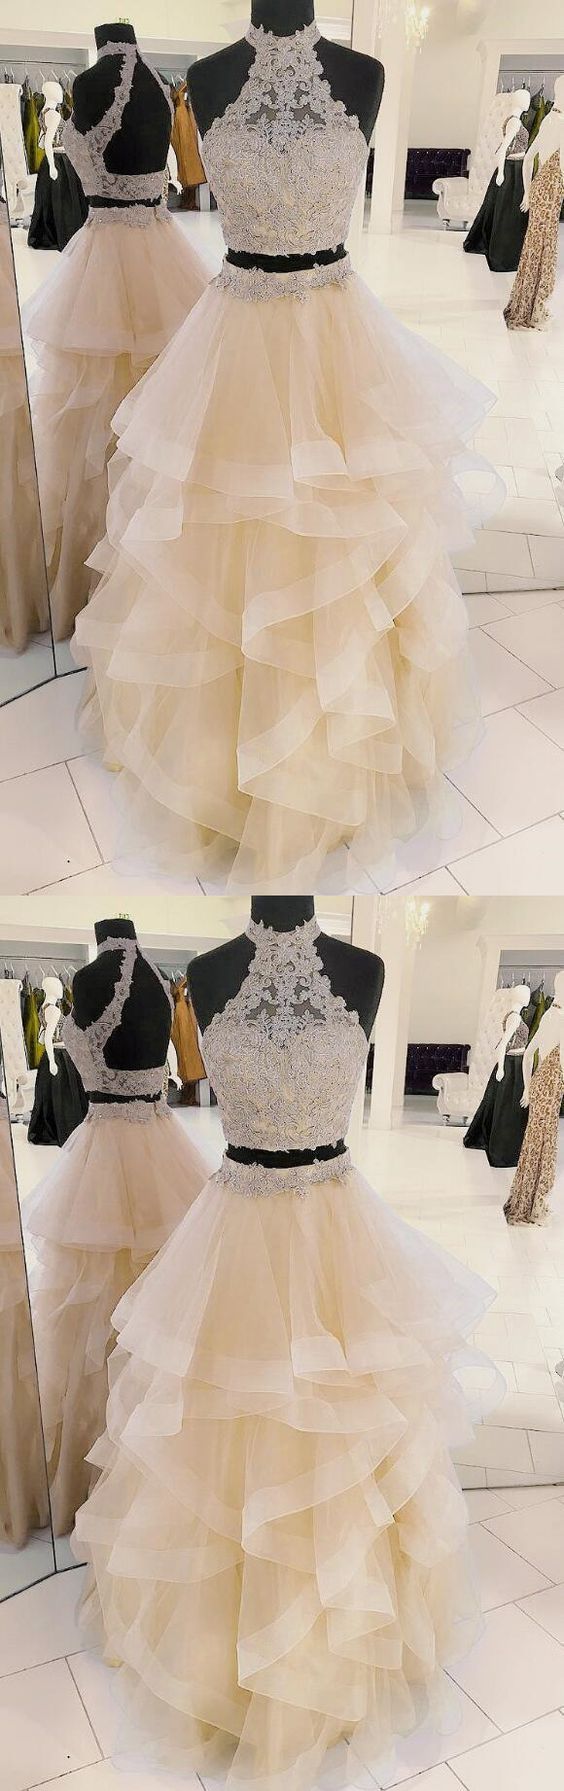 Halter Champagne Prom Dress,New Arrival Two-Piece Prom Dress,Cheap prom Dress,Beading Prom Dress,Tulle Long Prom/Evening Dress with Applique cg984